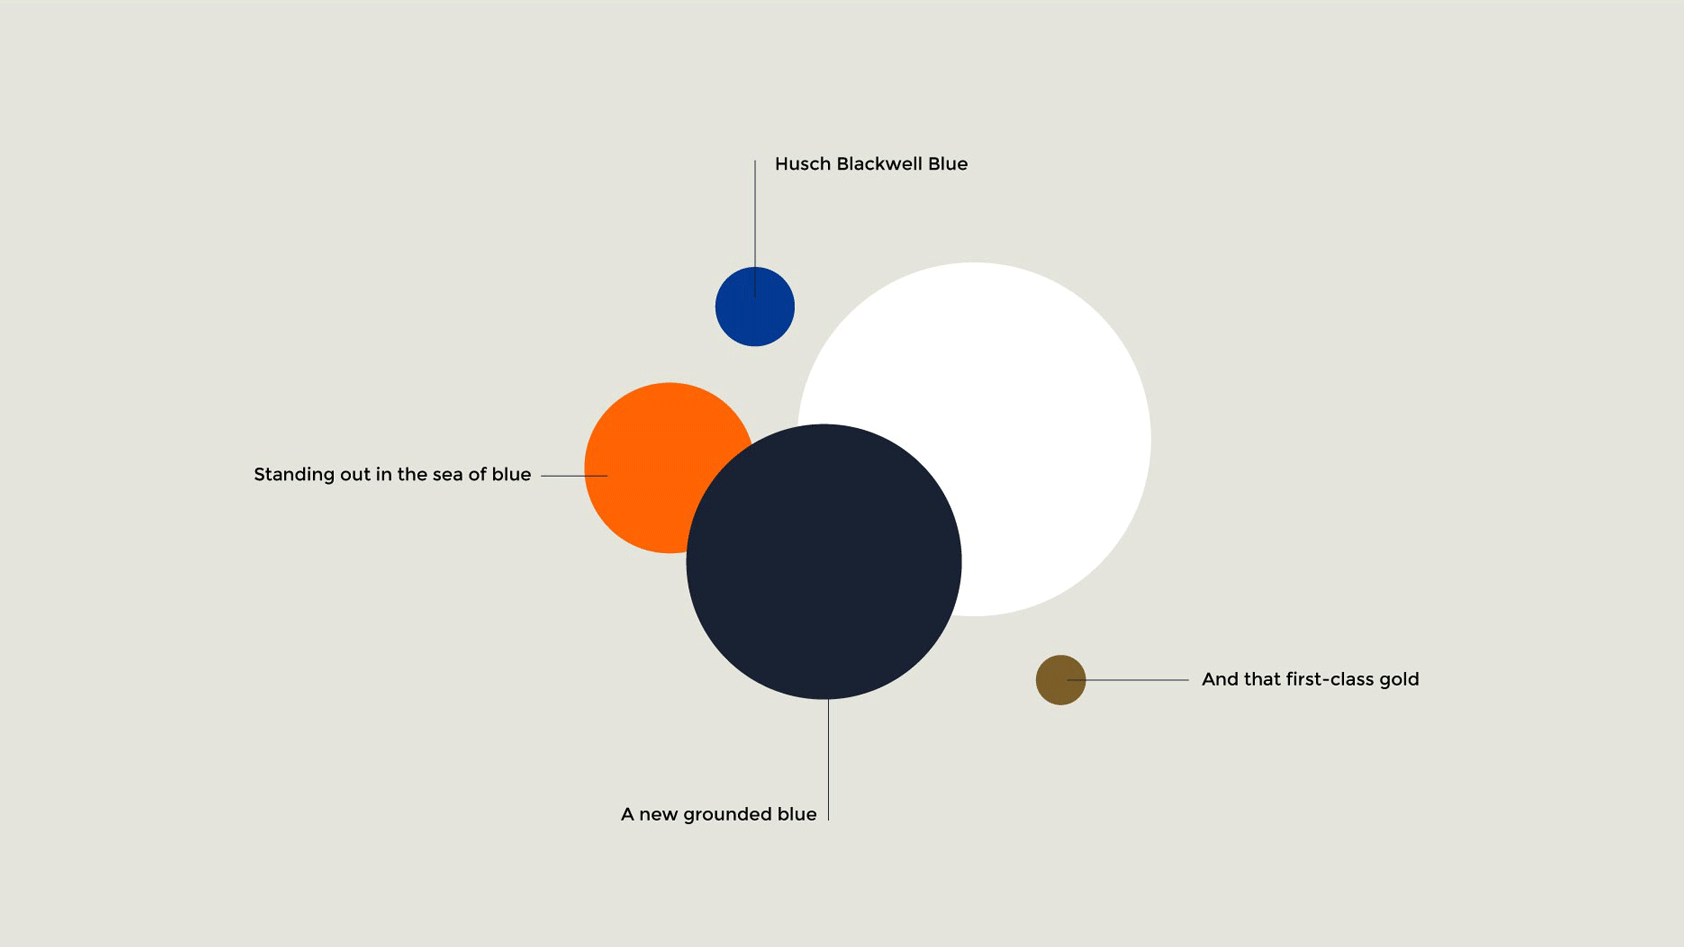 Early brand explorations - brand colors